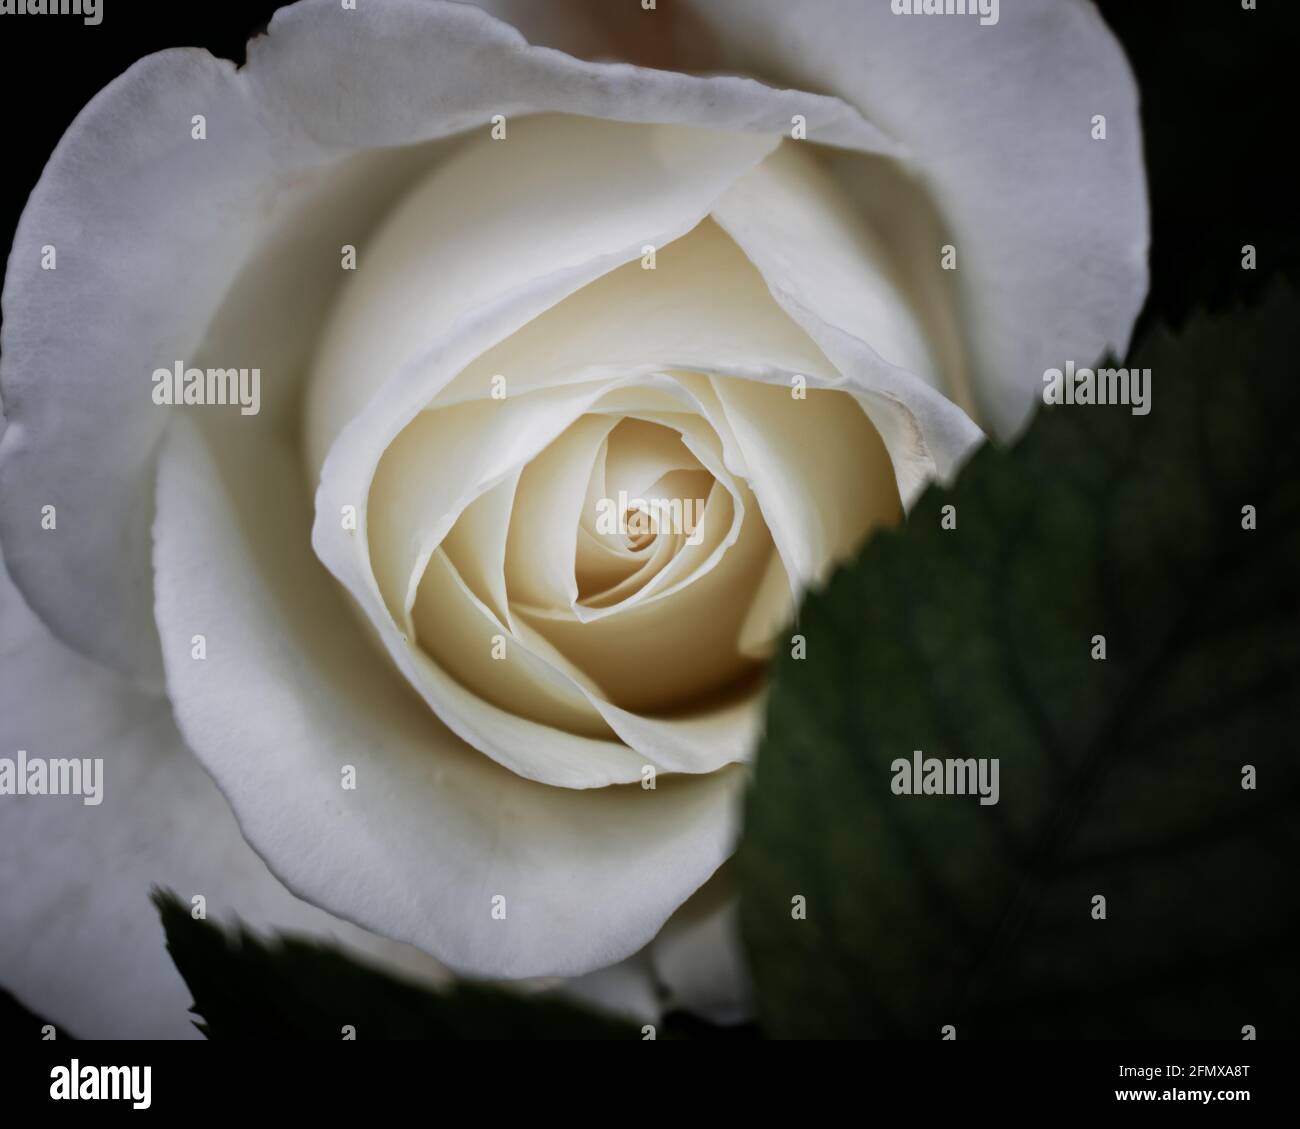 Close-up of a white rose in full bloom hiding behind leaf on dark background. Macro photography with selective focus on flower in moody tones Stock Photo